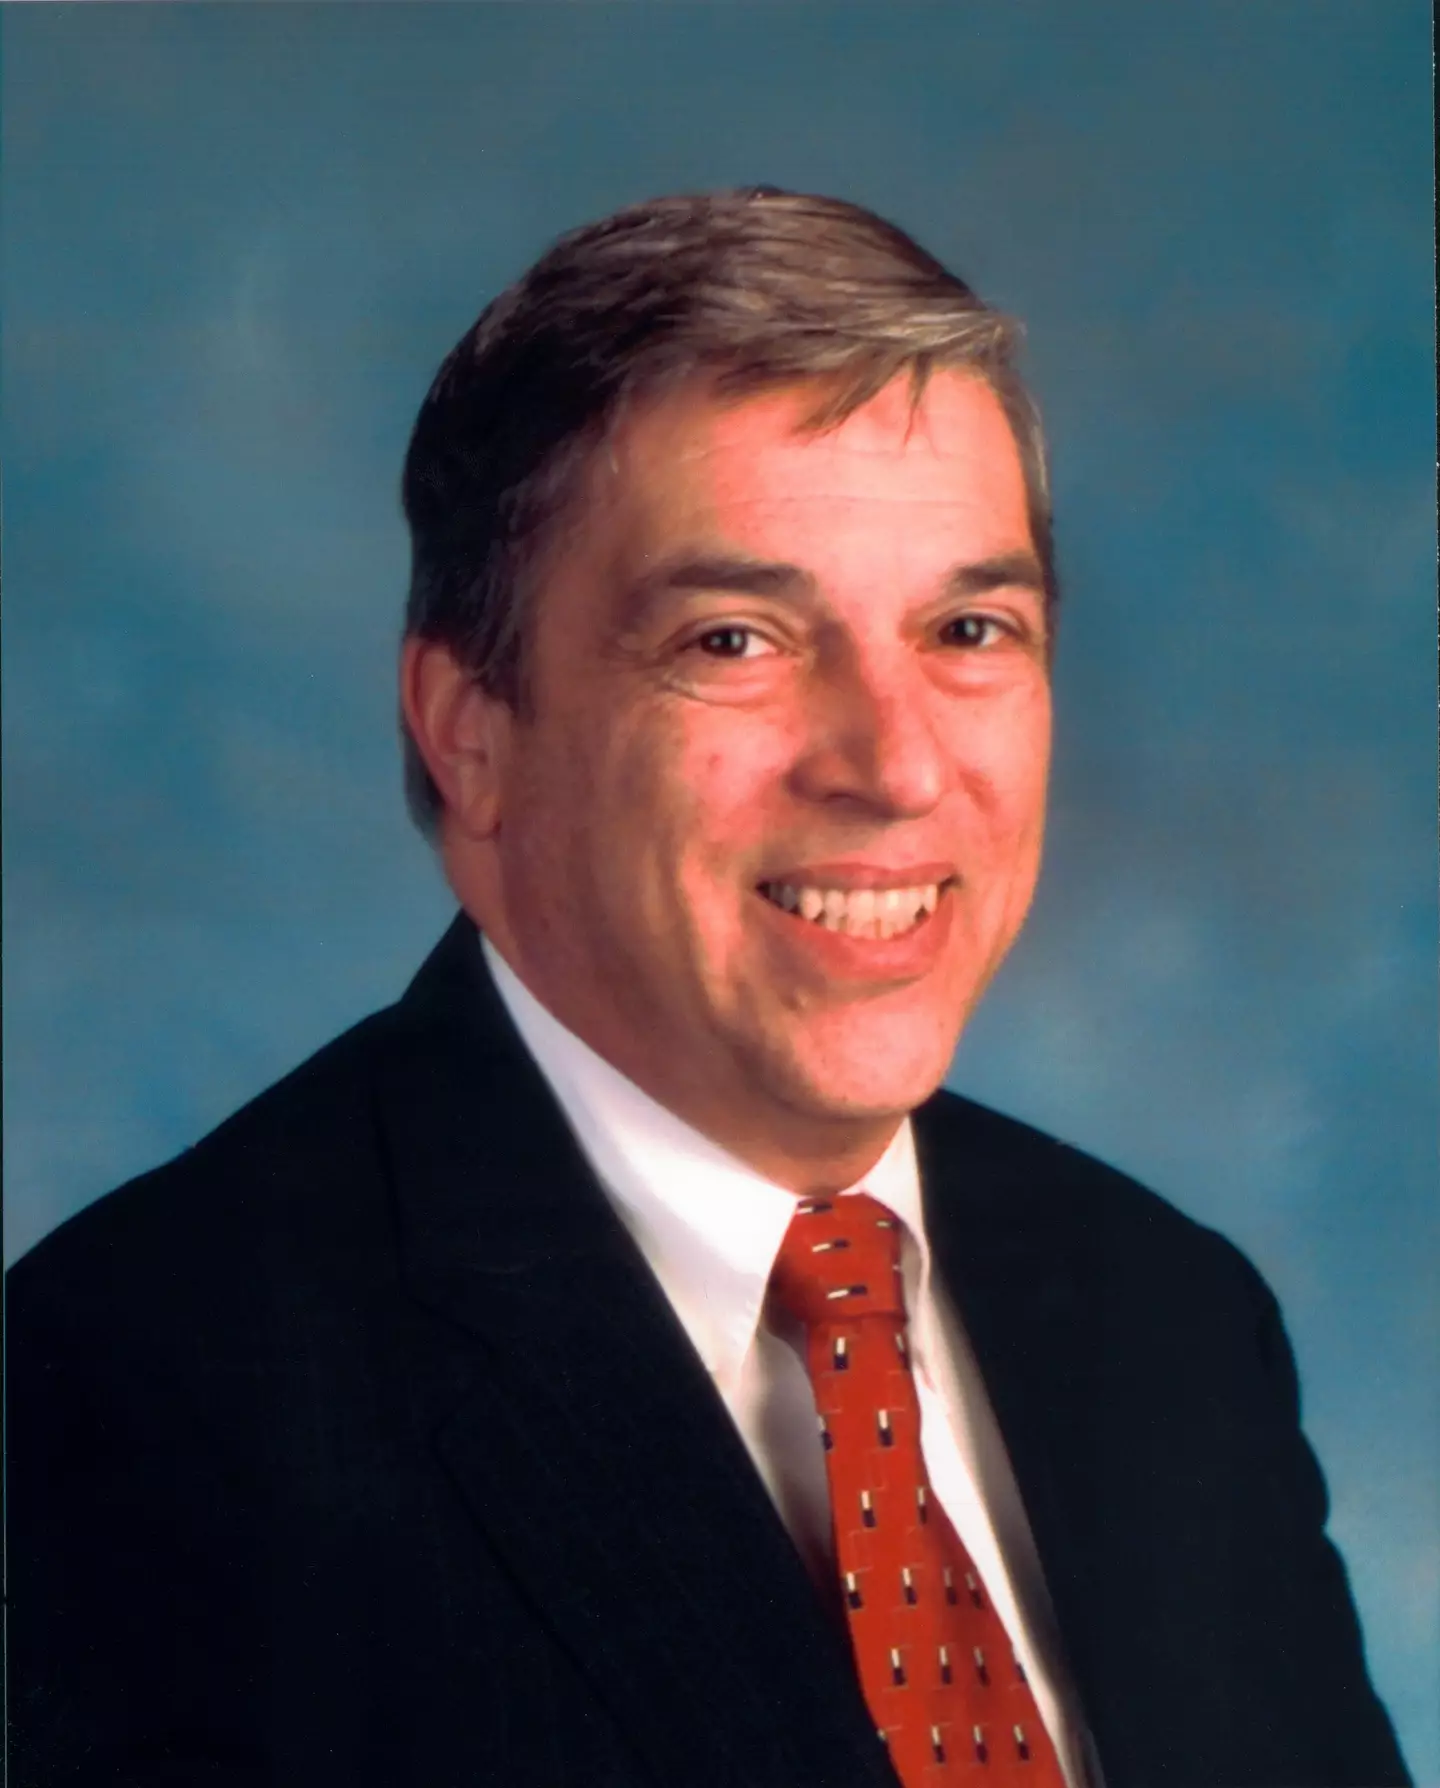 Robert Hanssen embedded himself in the FBI for two decades.